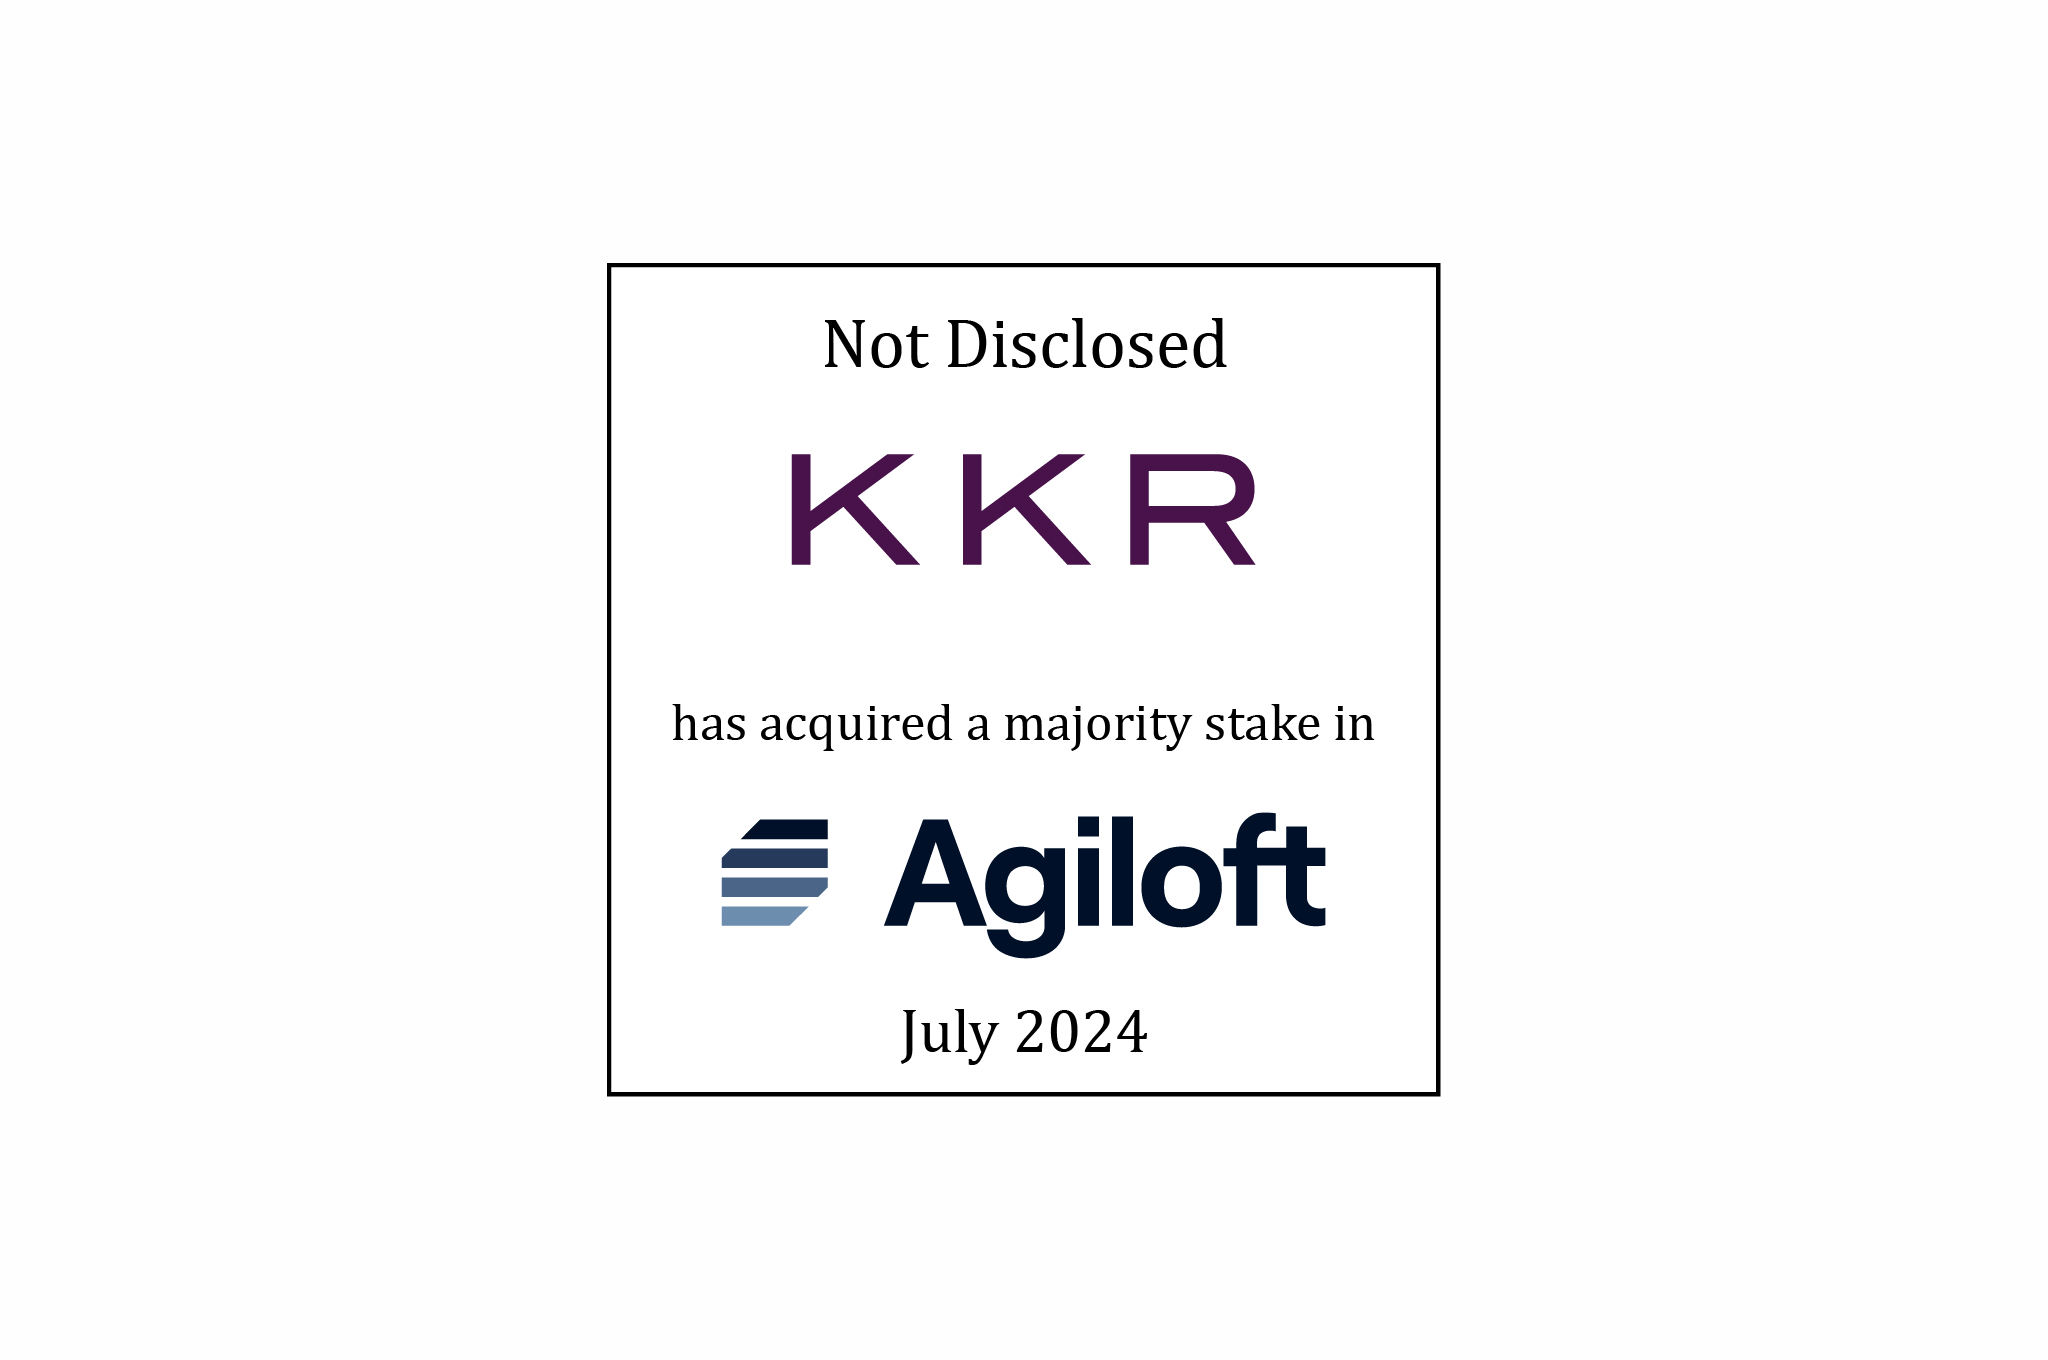 Not Disclosed - KKR has acquired a majority stake in Agiloft - July 2024